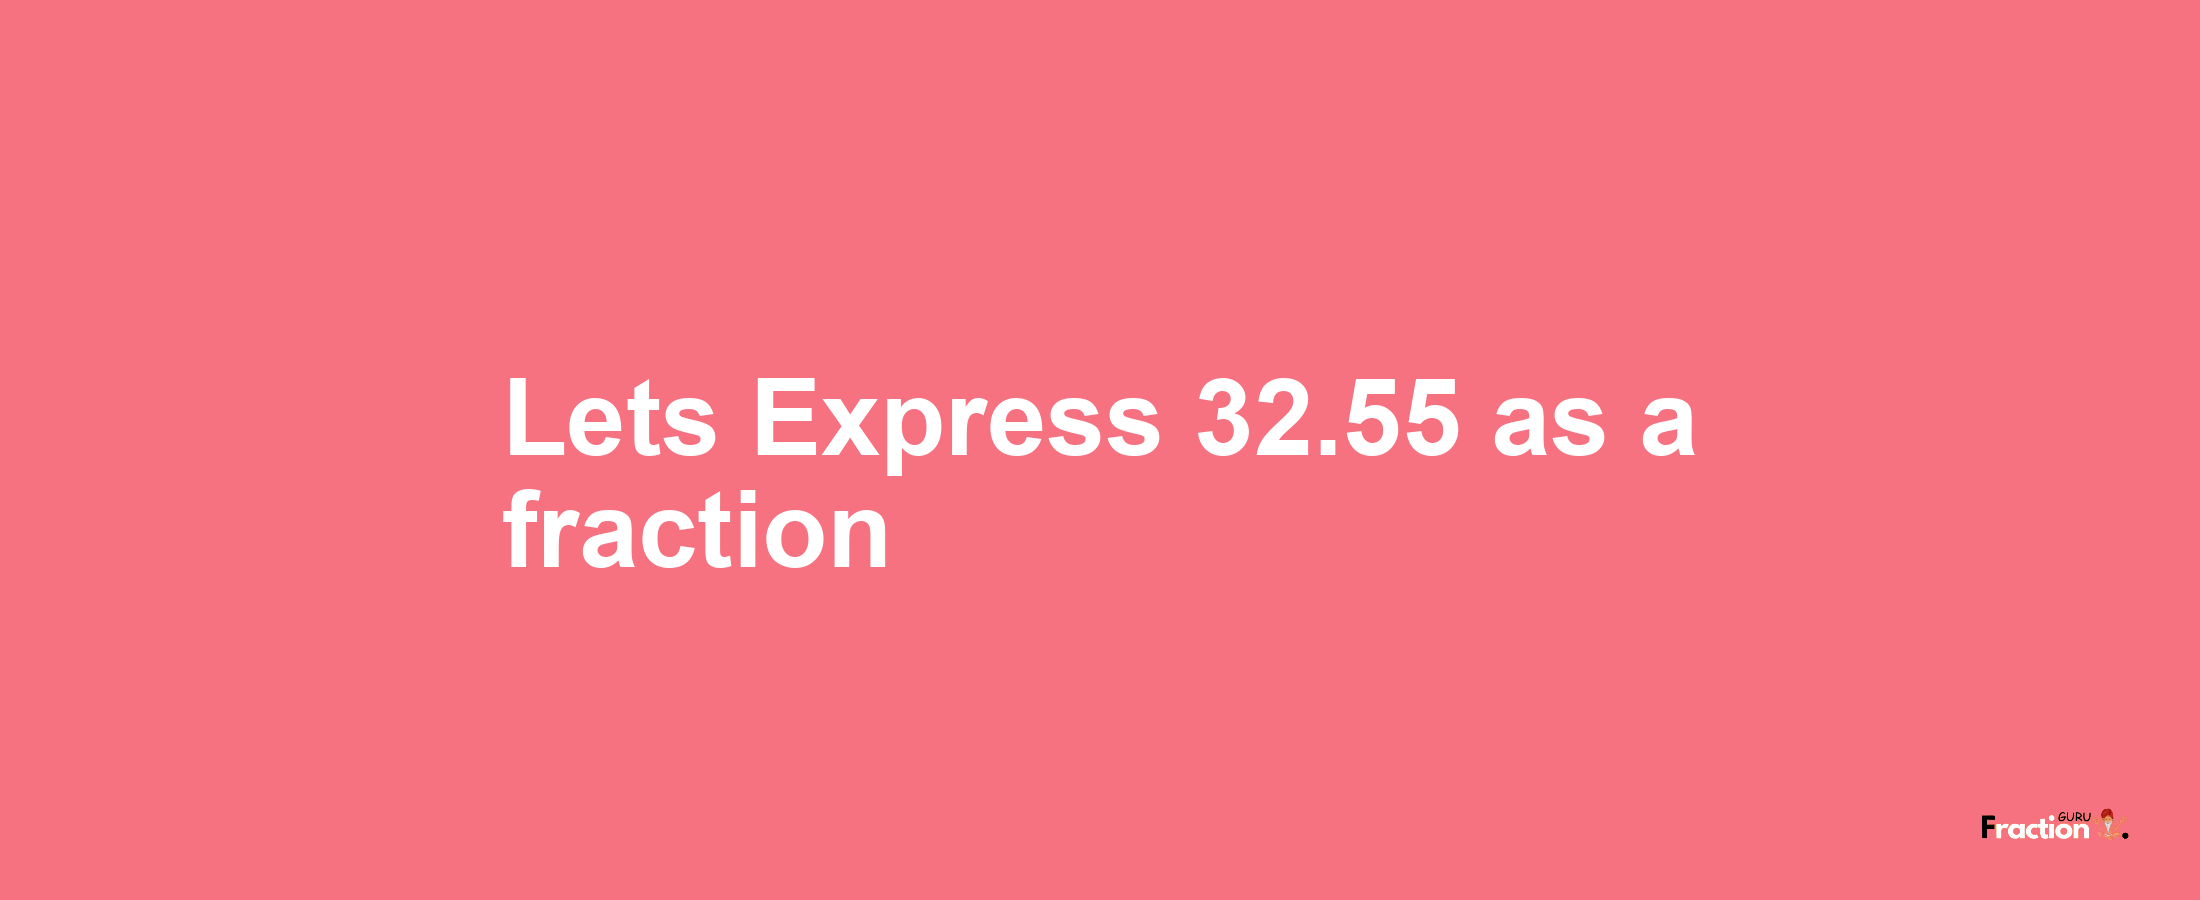 Lets Express 32.55 as afraction